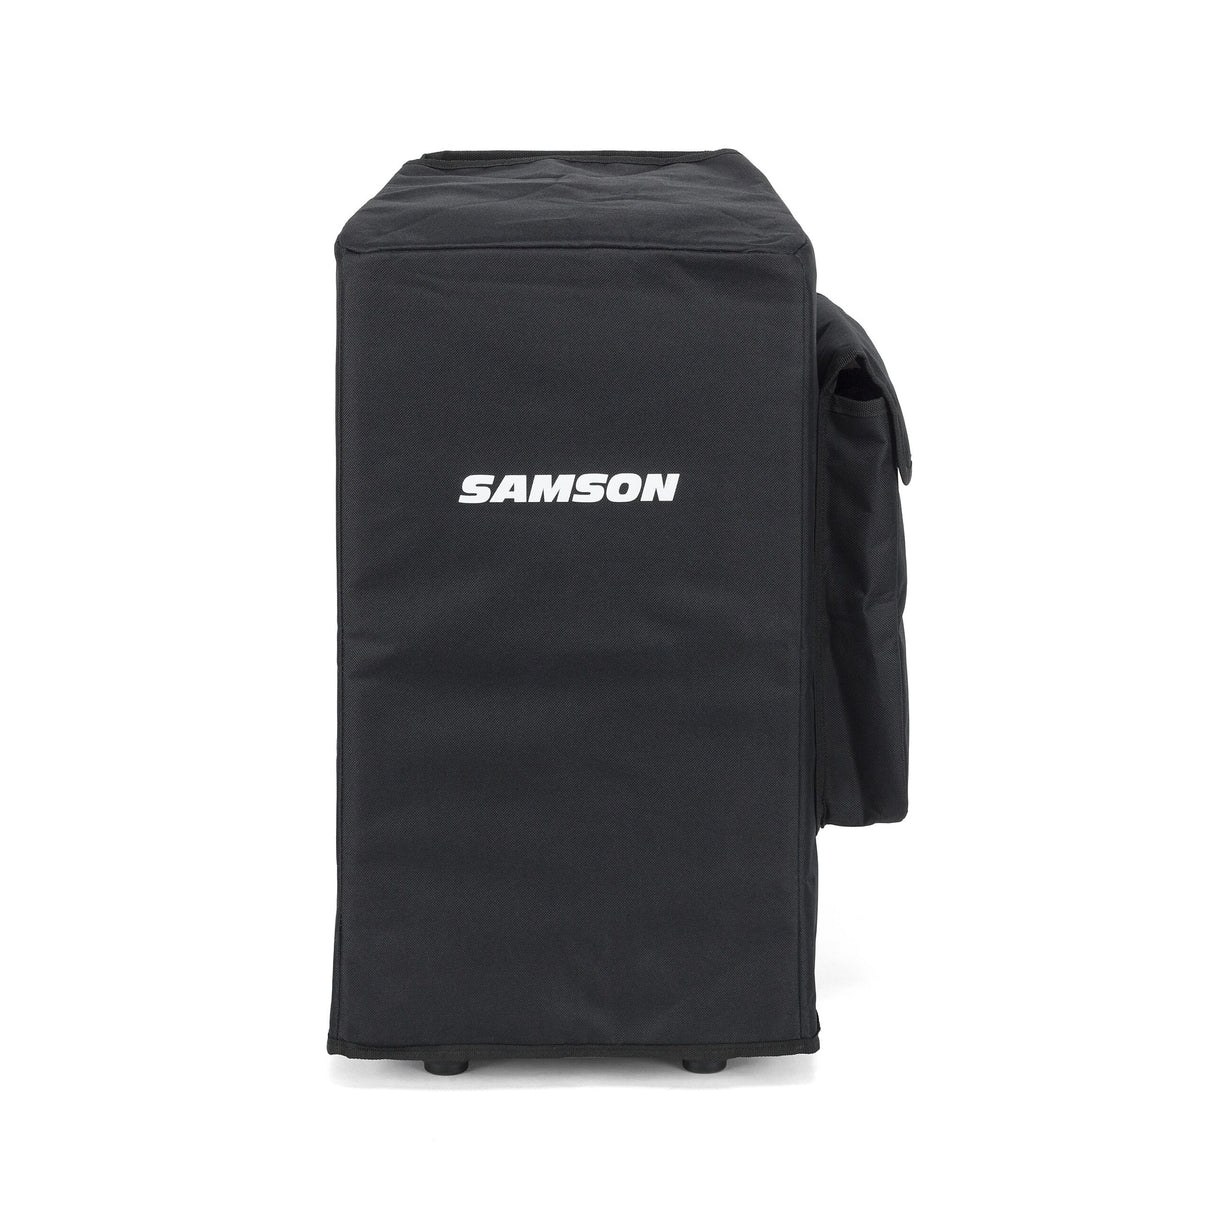 Samson Dust Cover for XP310w